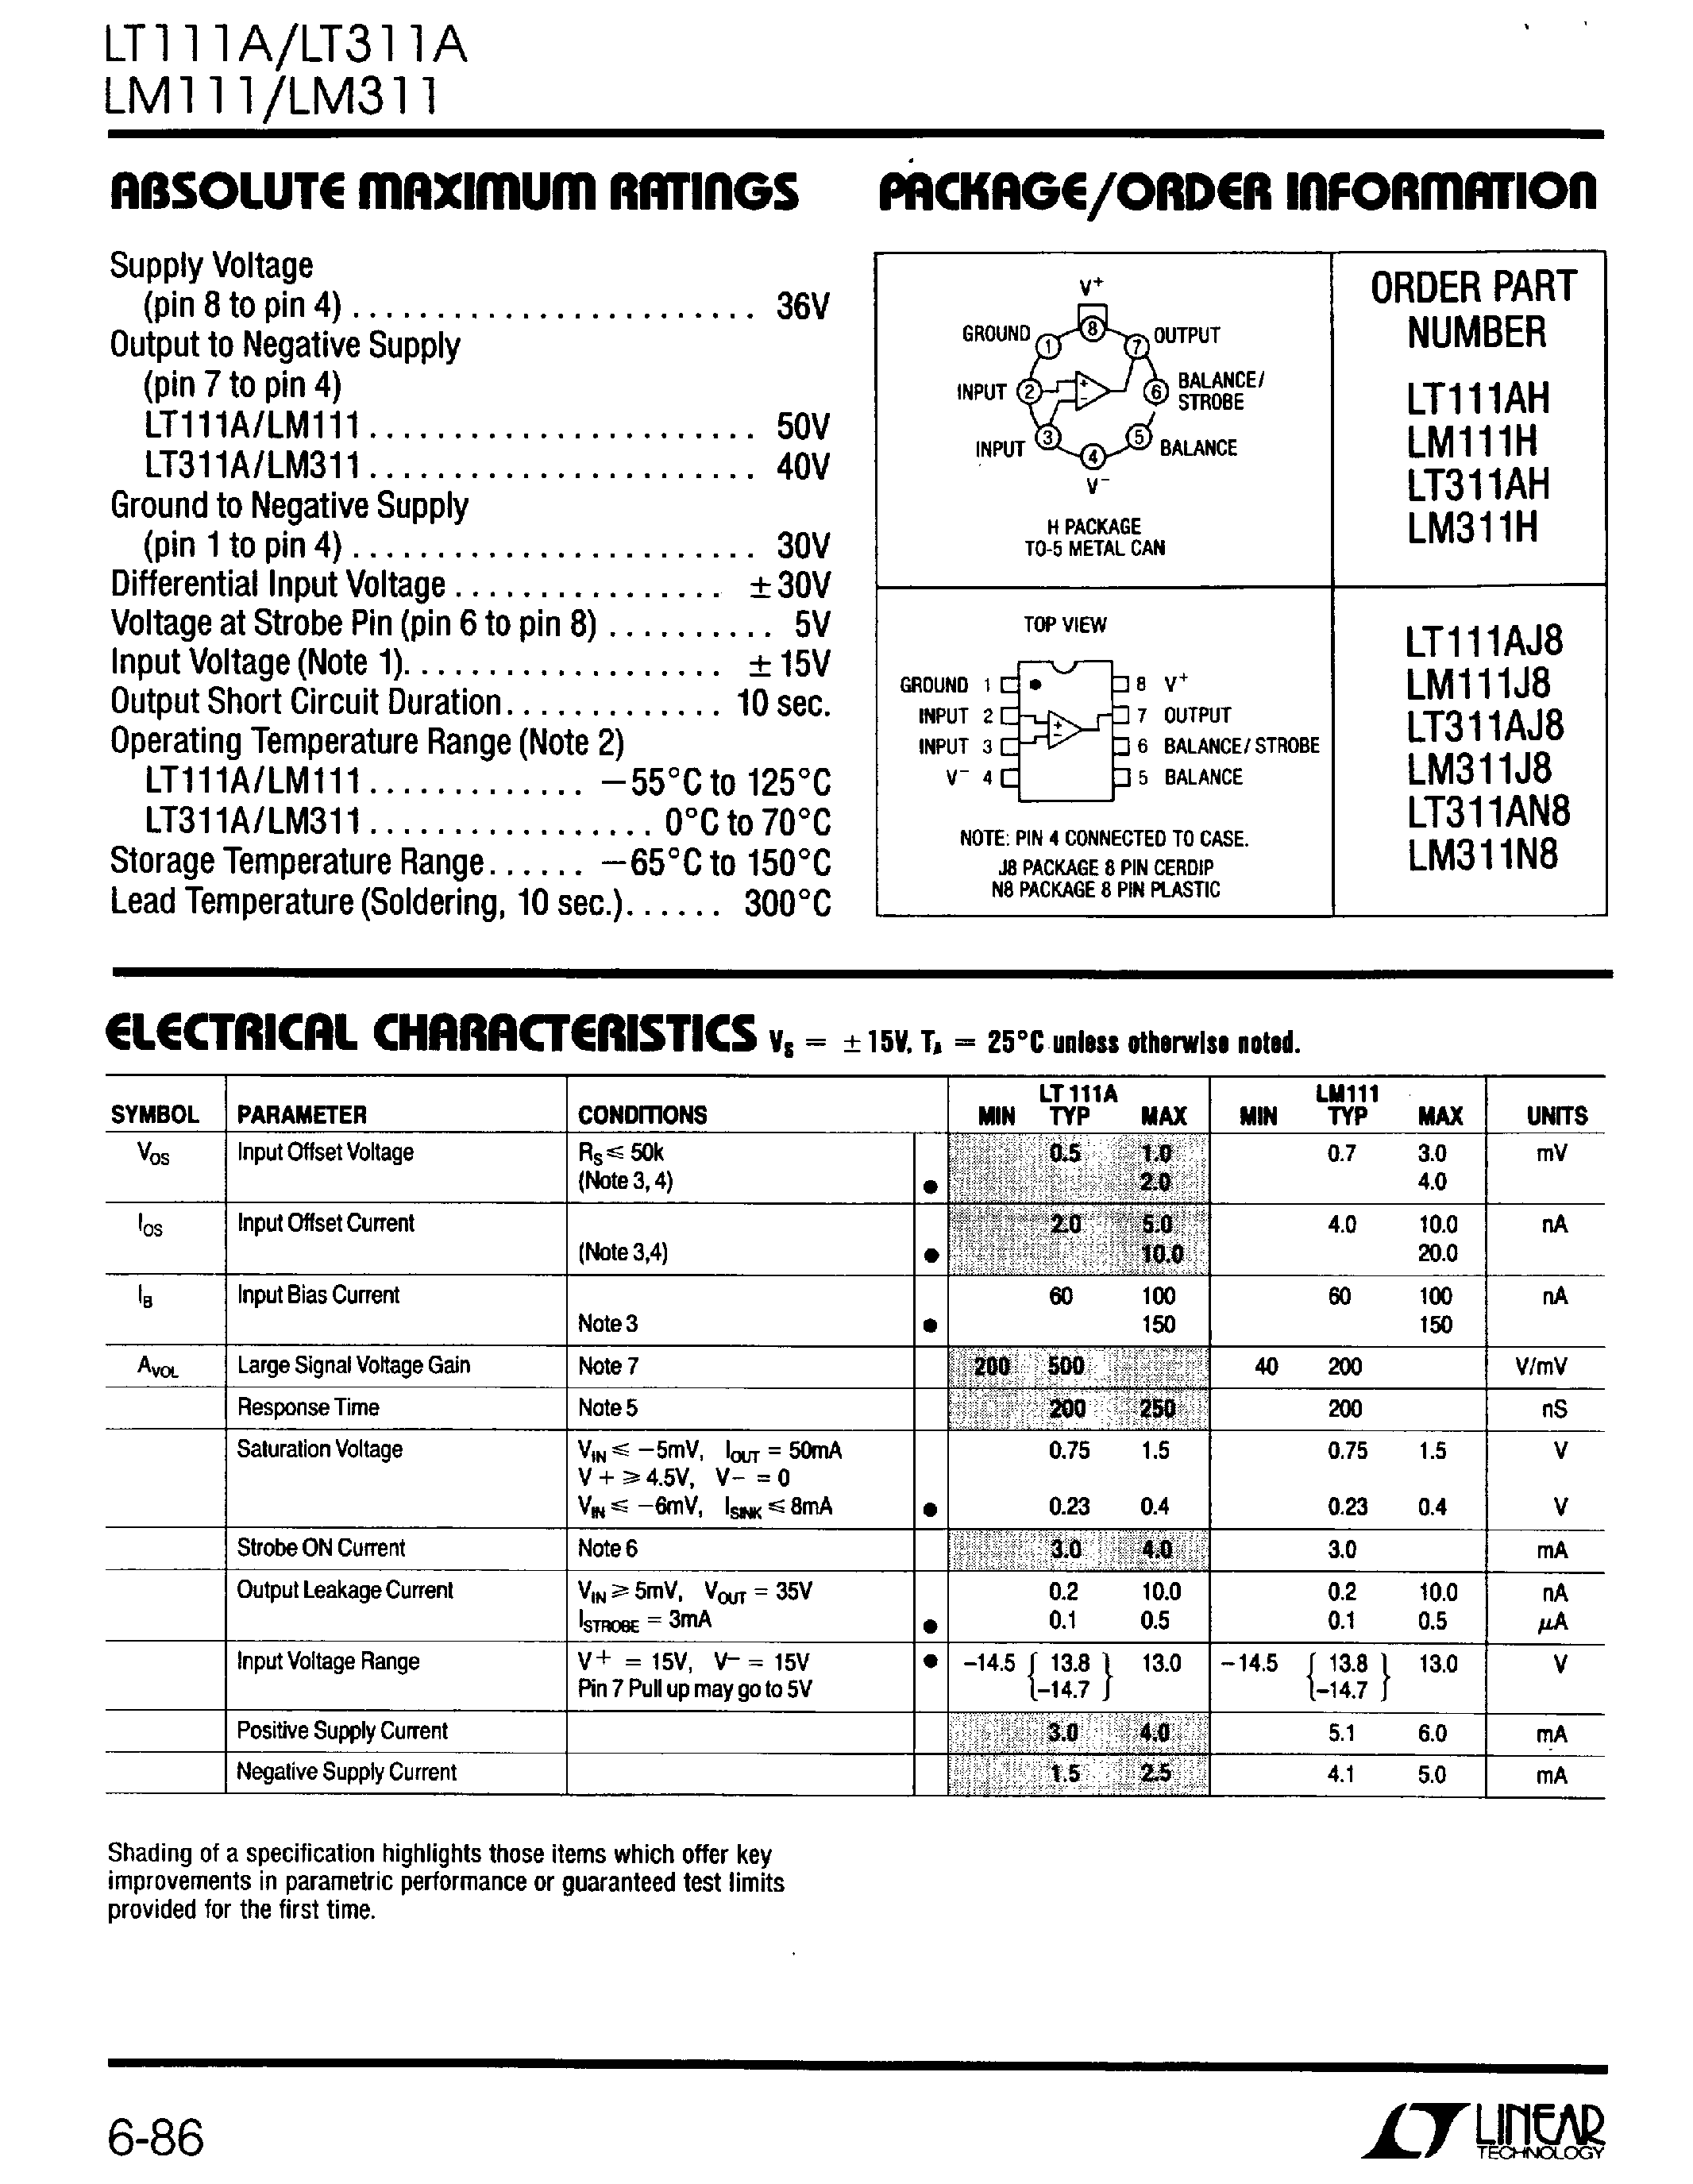 Datasheet LM311 - Voltage Comparator page 2